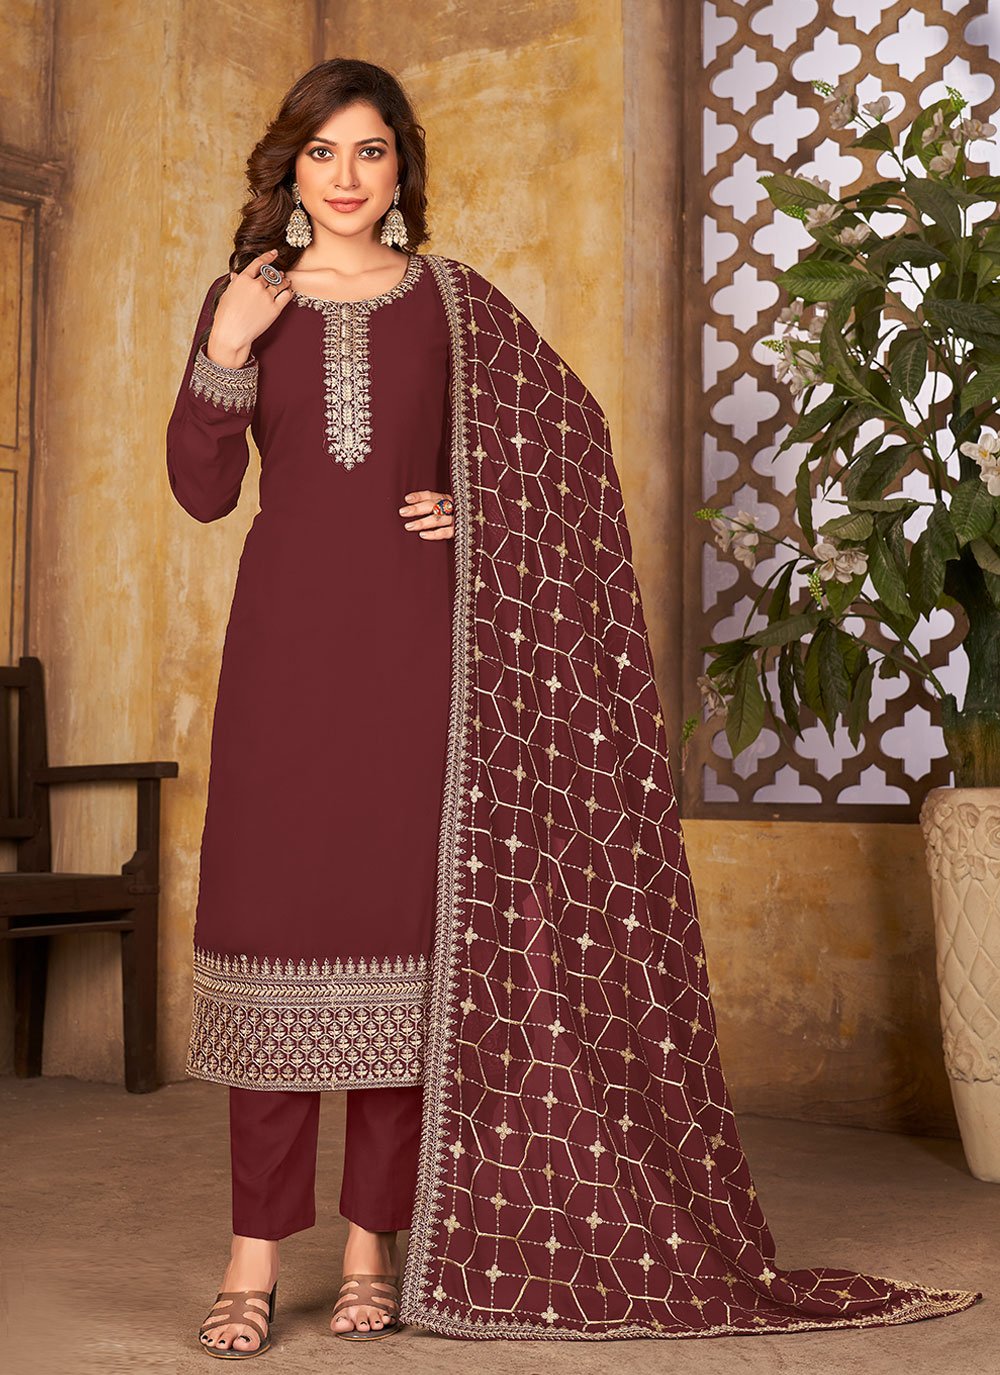 Maroon color Embroidered Faux Georgette Salwar Suit